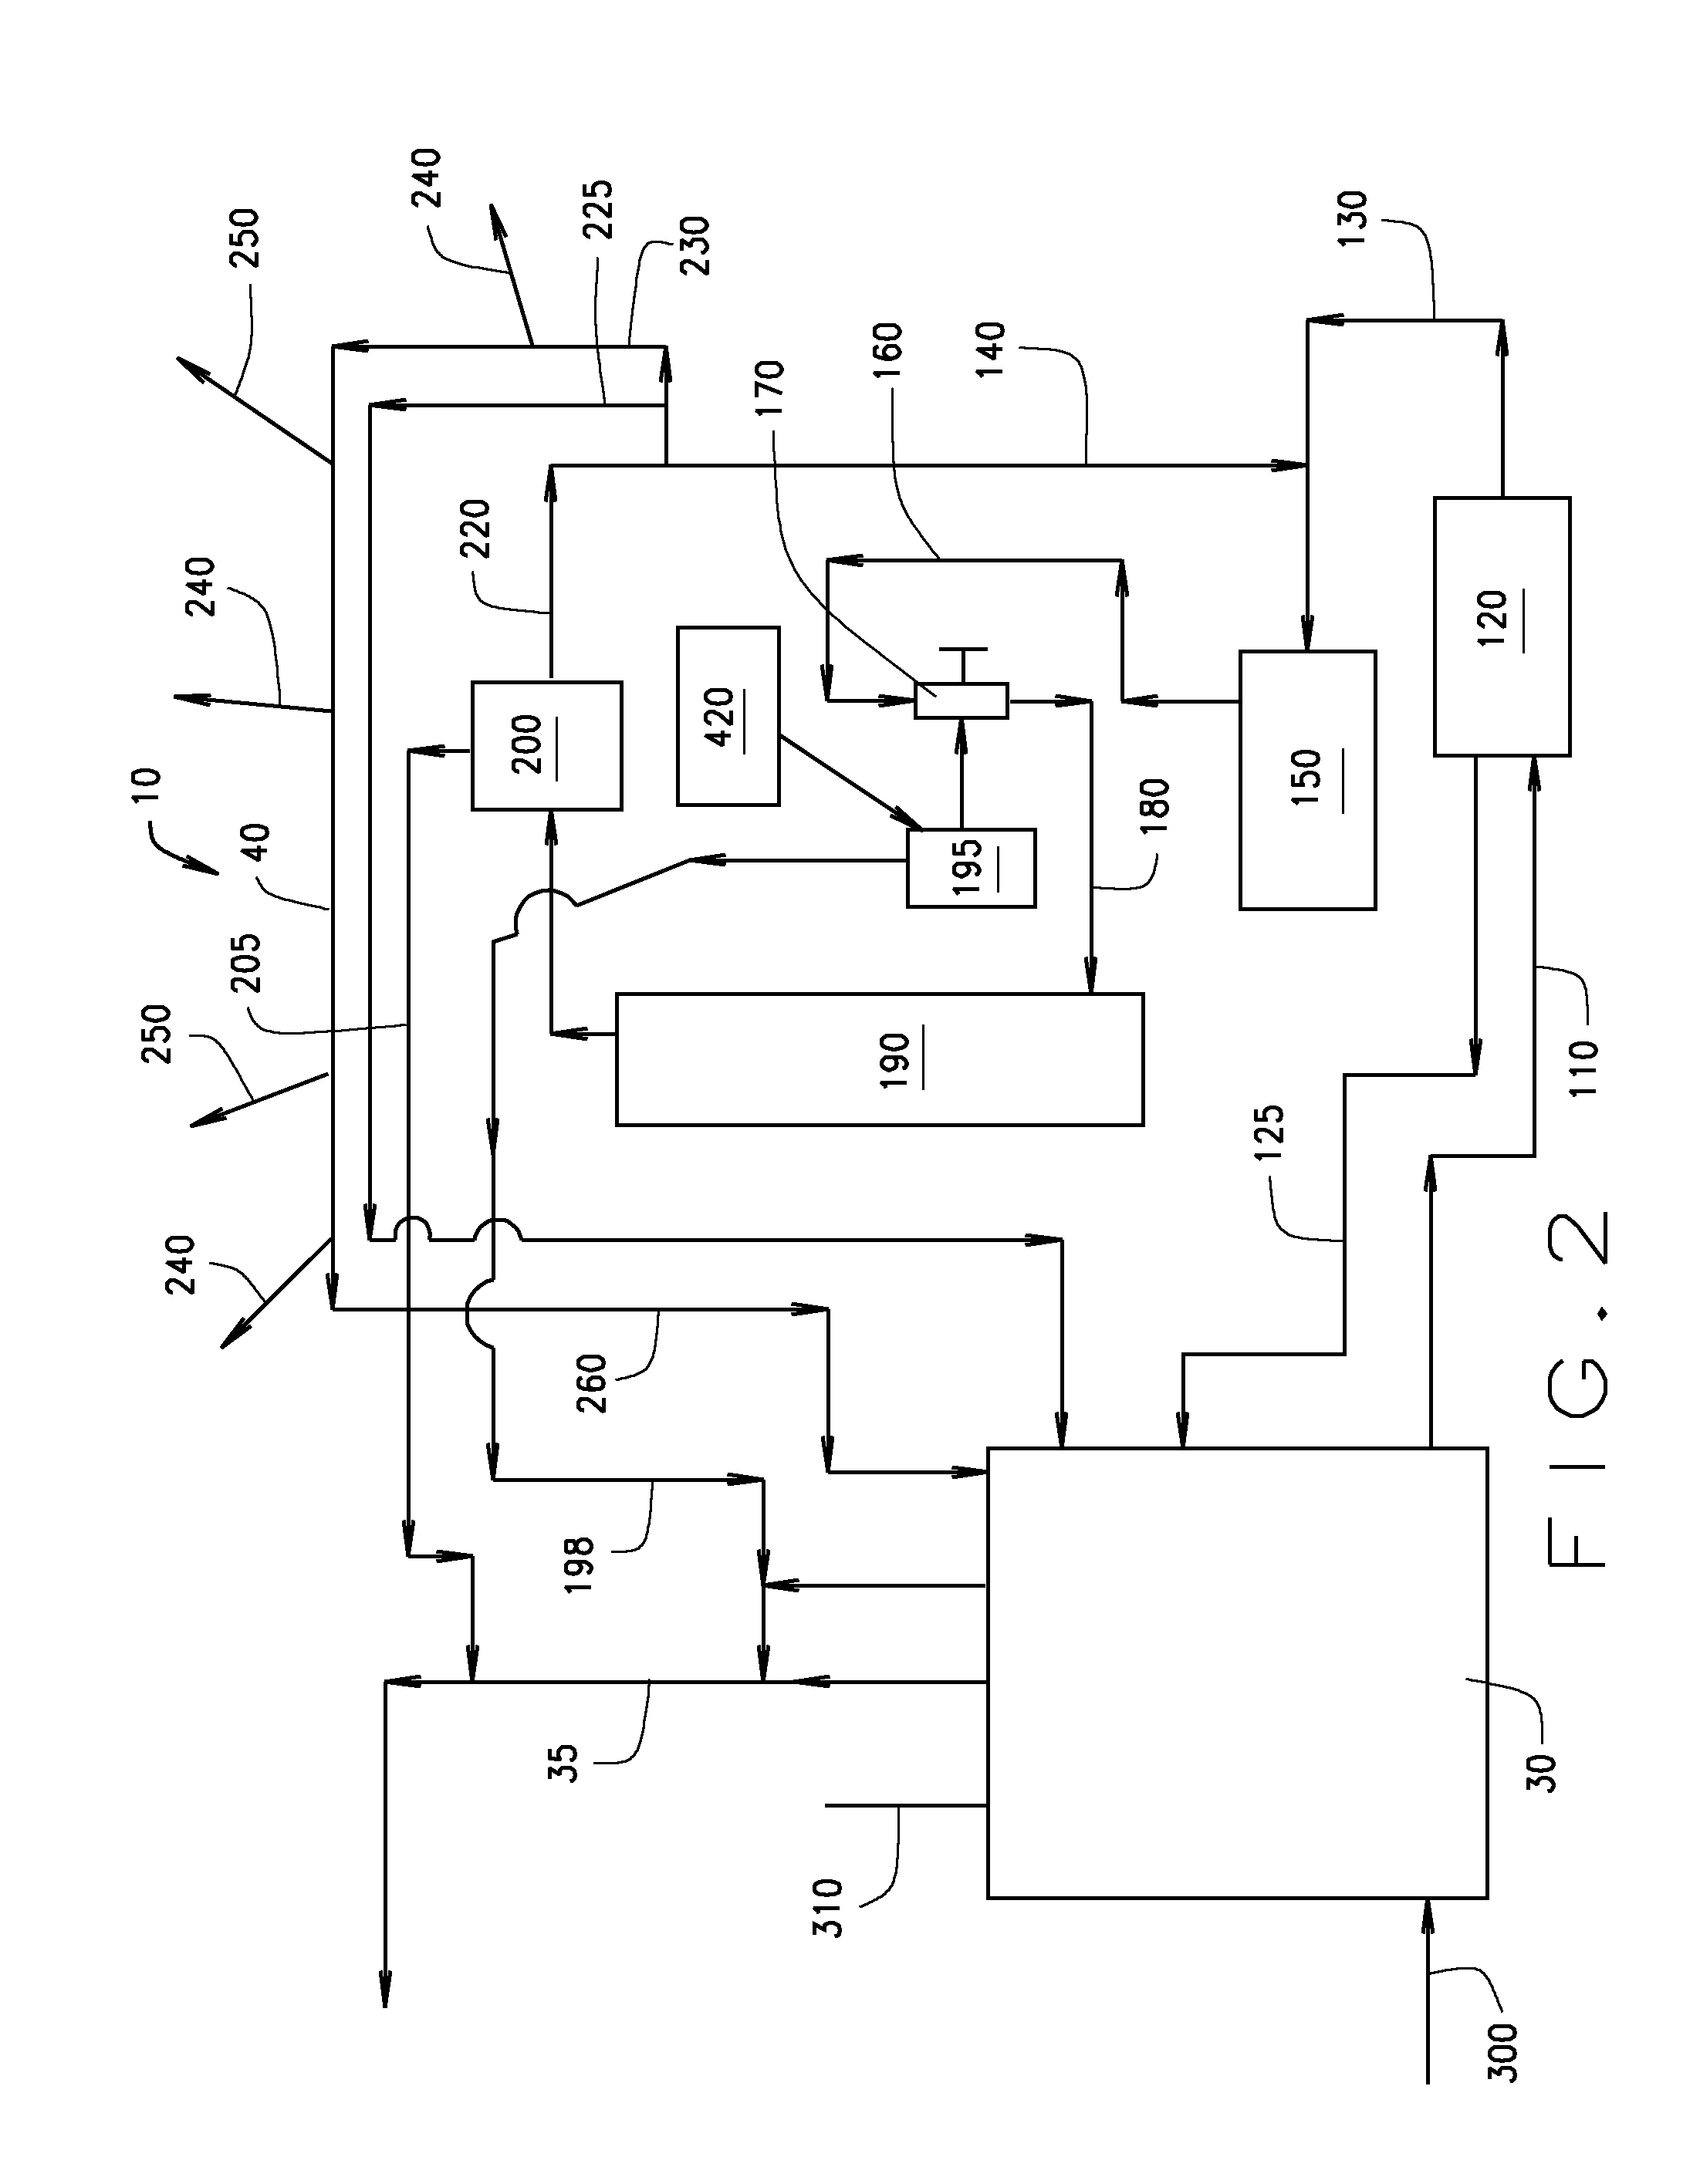 System for producing and distributing an ozonated fluid